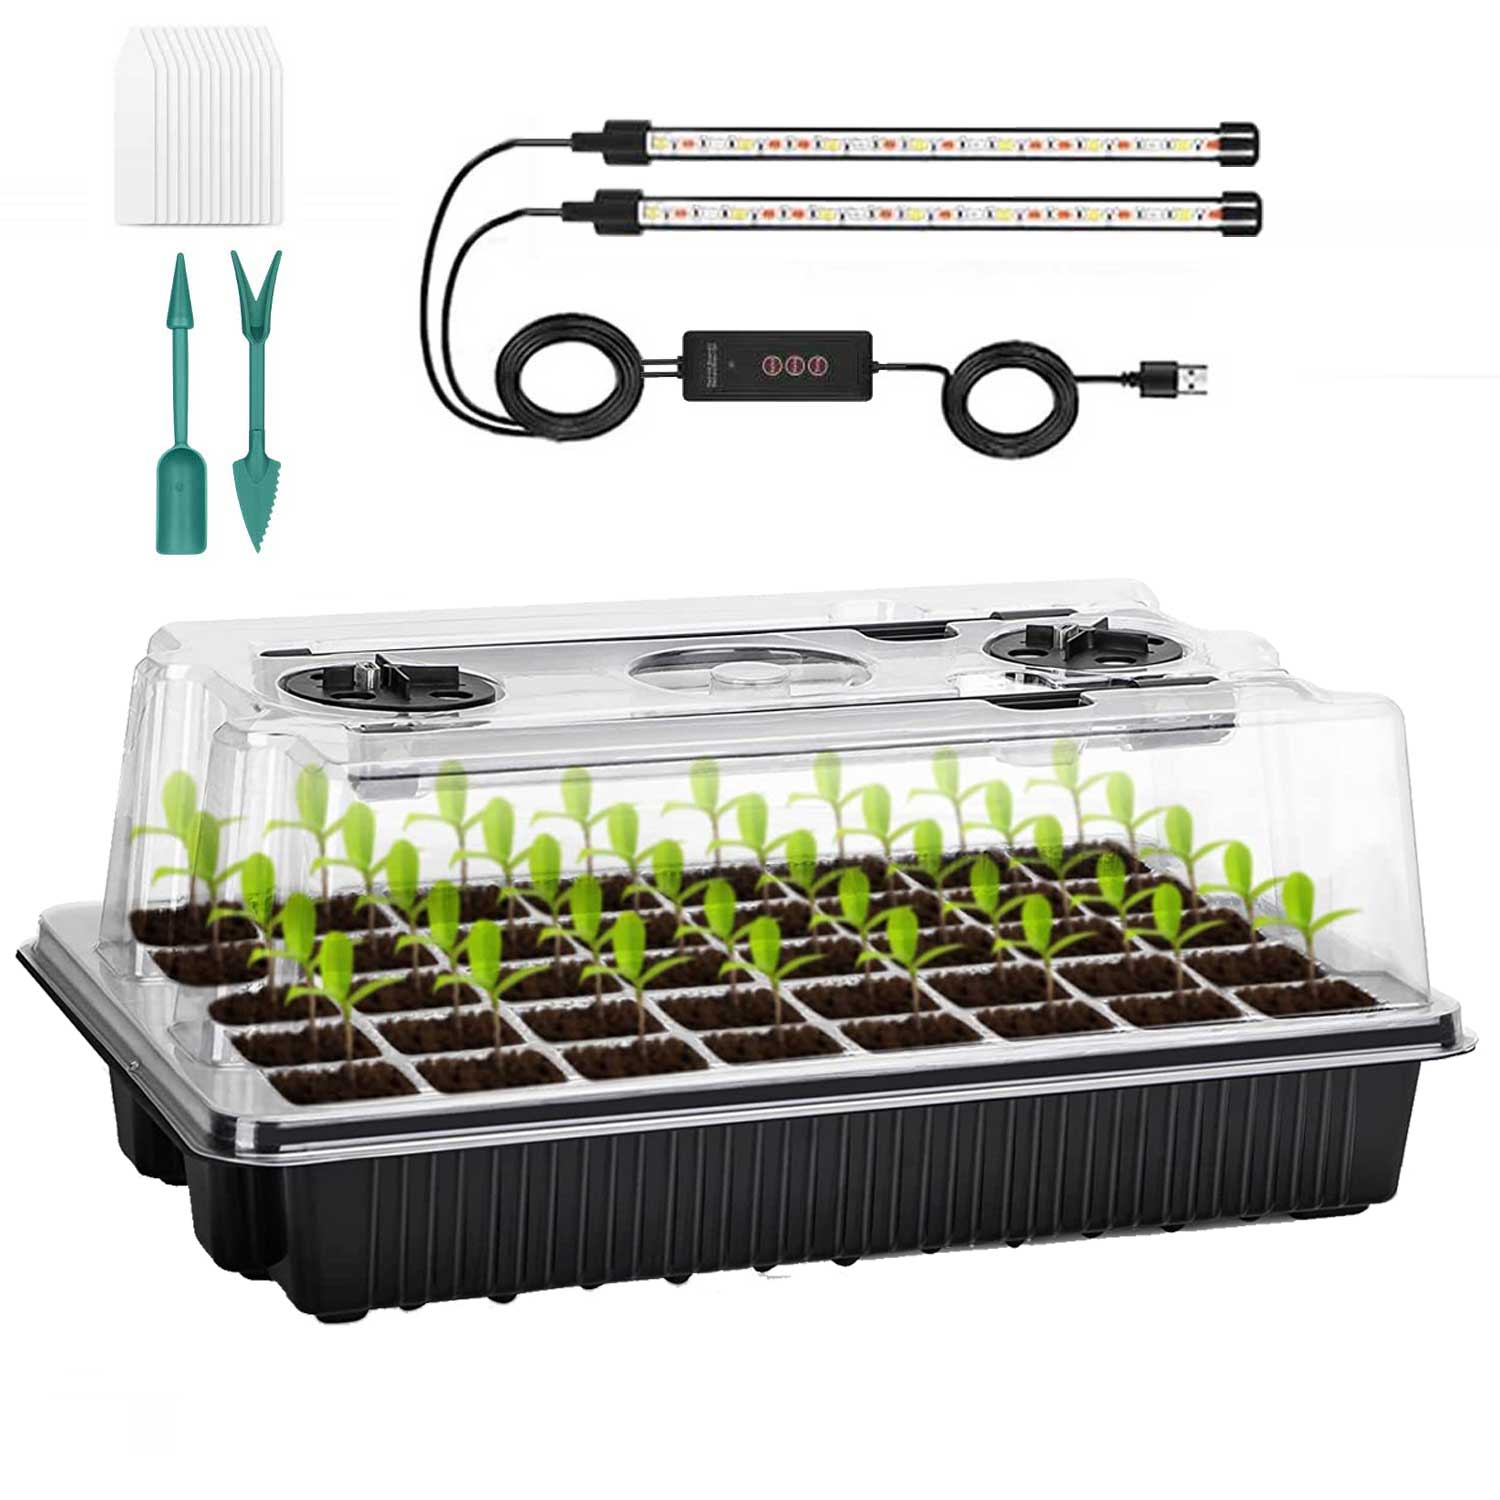 1 Packs Seed Starter Tray with Grow Light High Dome Seed Germination Kit 40 Cells with 2 LED Grow Lights Seedling Starter Kit with Smart Timer Red&lue and Yellow Fullspectrum Growth Light